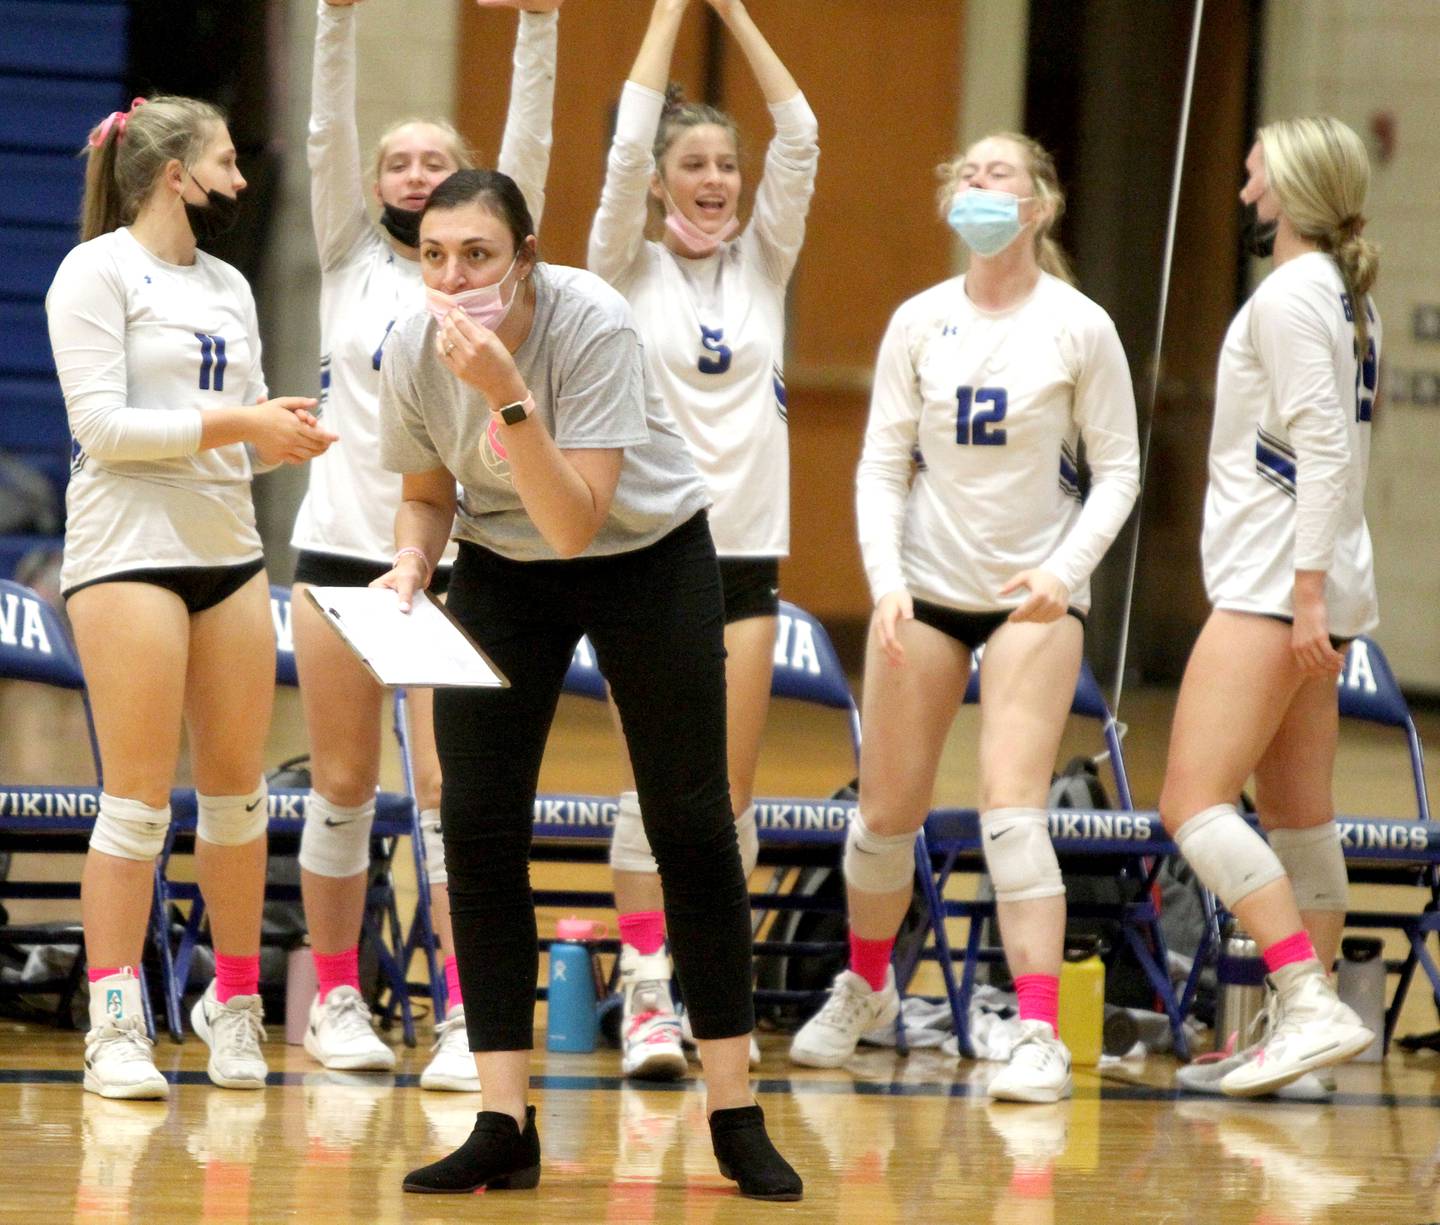 Lauren Kosecki, a graduate of Geneva High School and former athlete, is now girls varsity volleyball head coach at her alma mater and a teacher in the district.